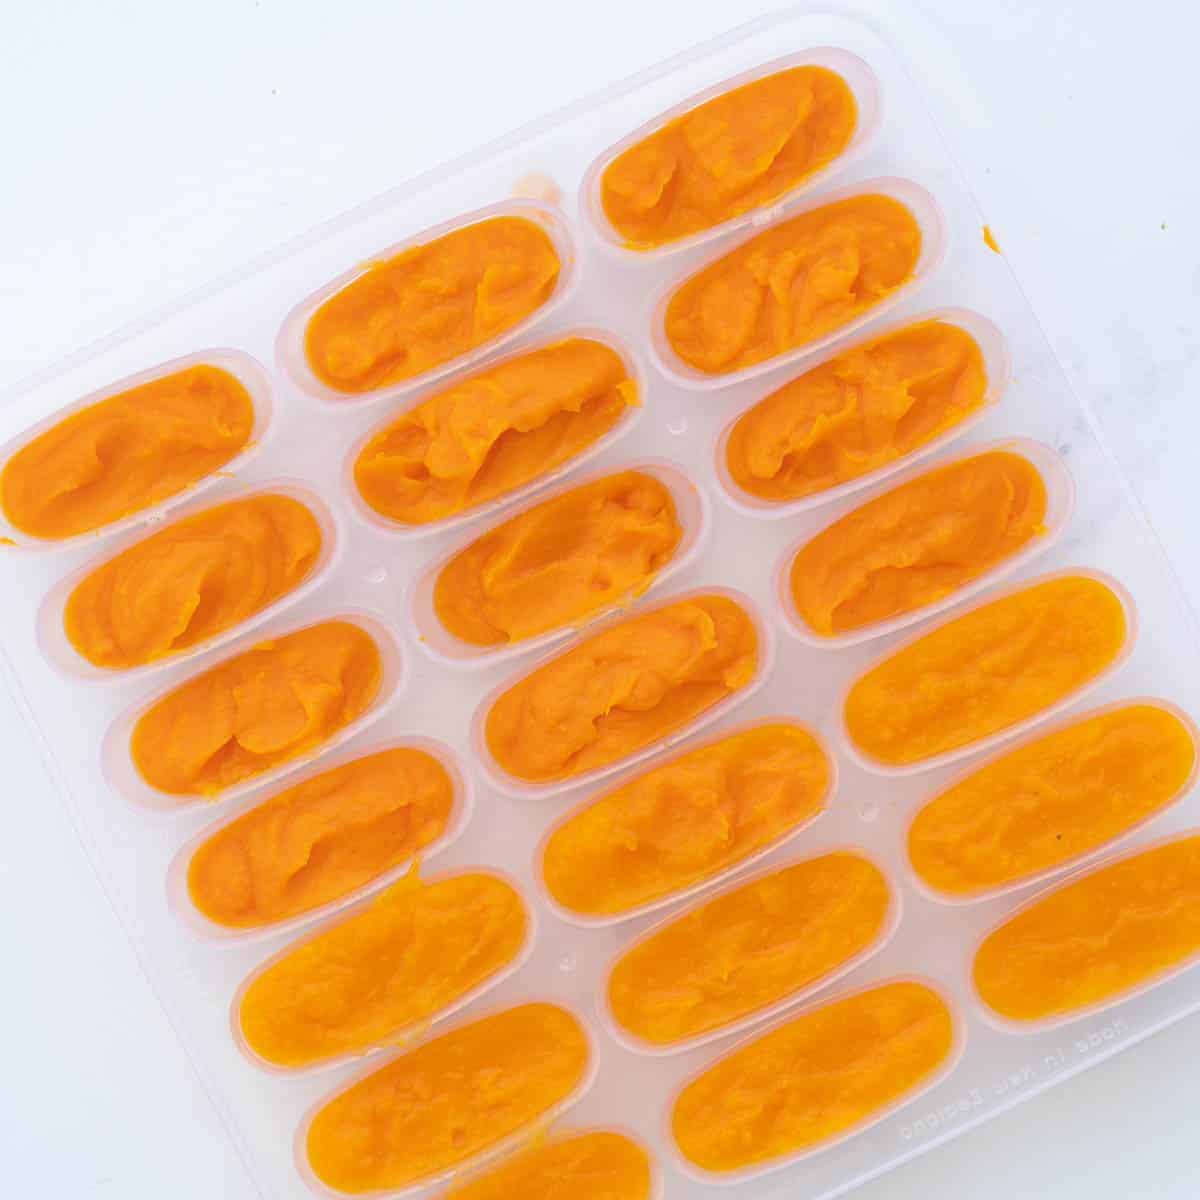 a baby food tray filled with orange vegetable puree.